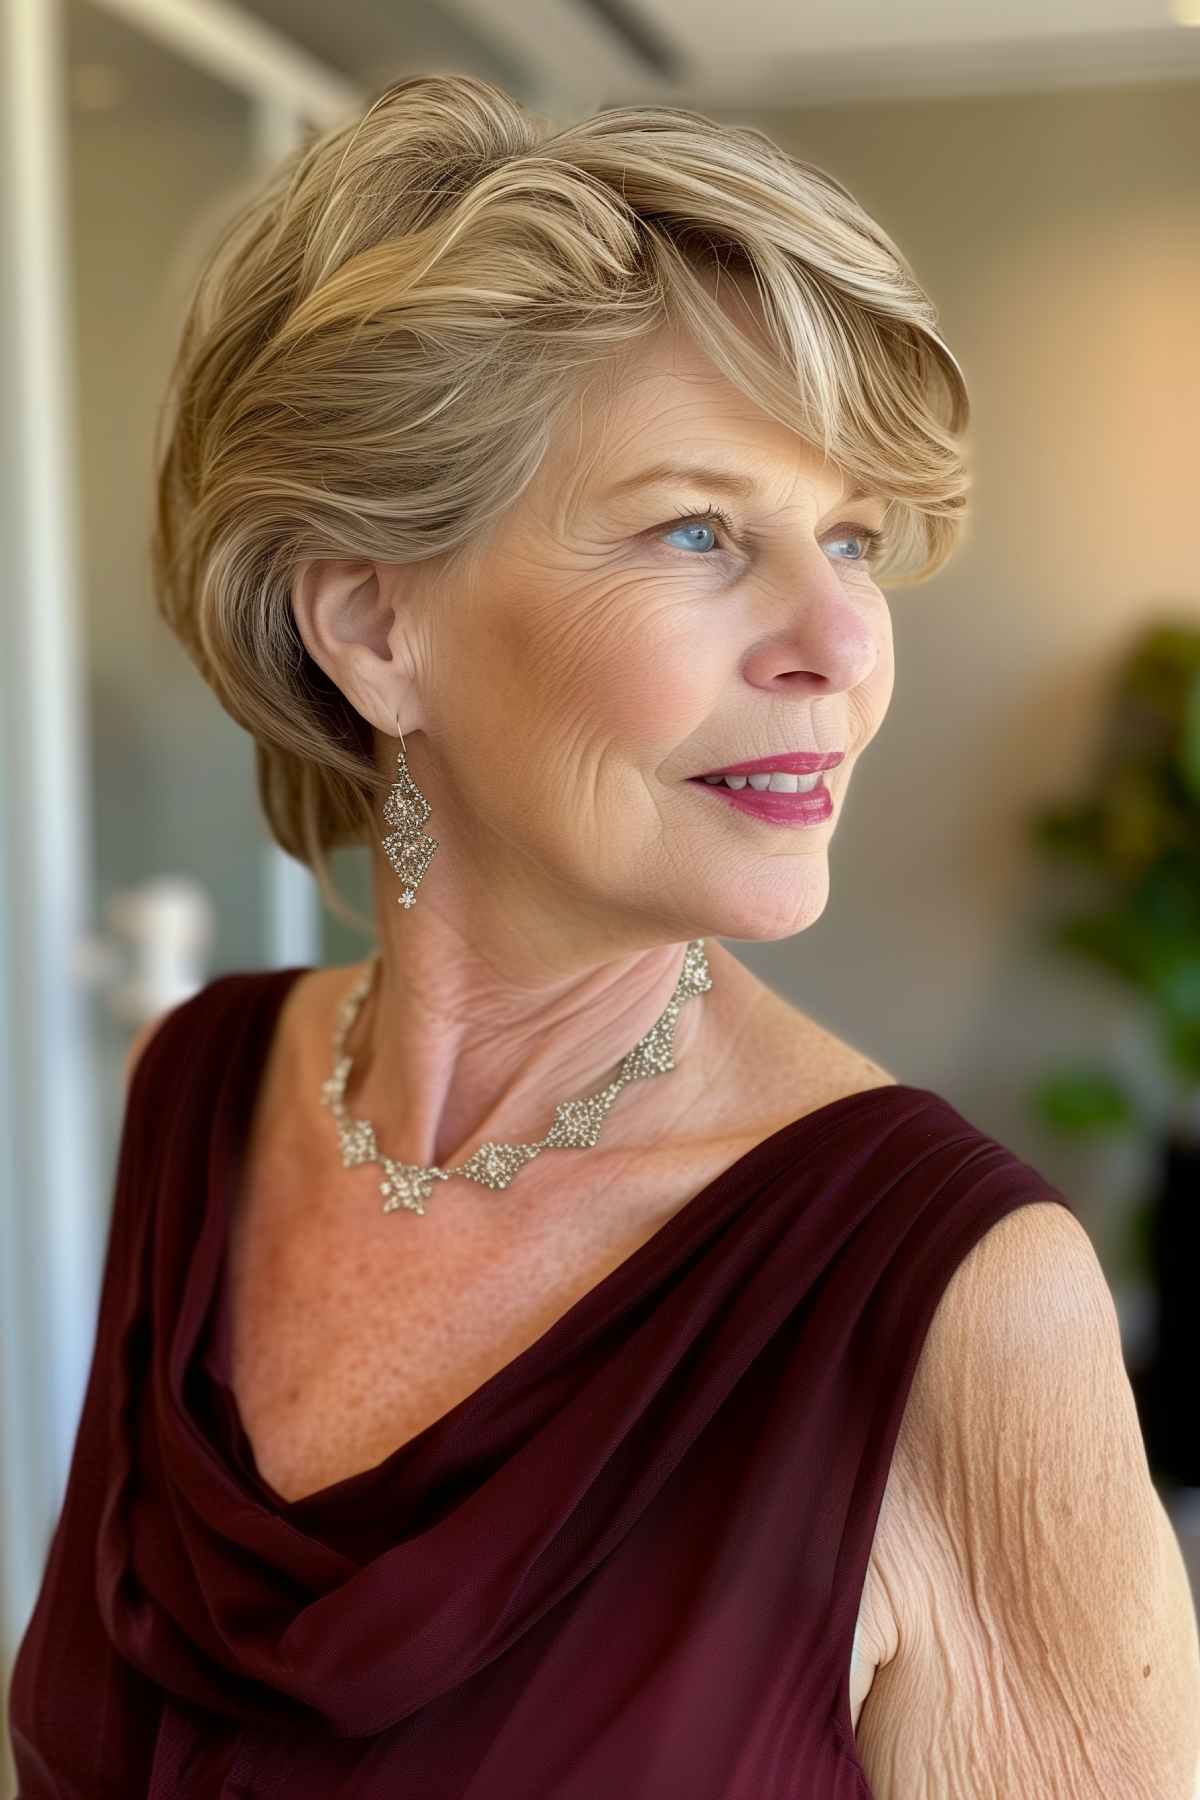 A woman with a short, layered haircut featuring feathery layers, side-swept bangs and warm blonde highlights.